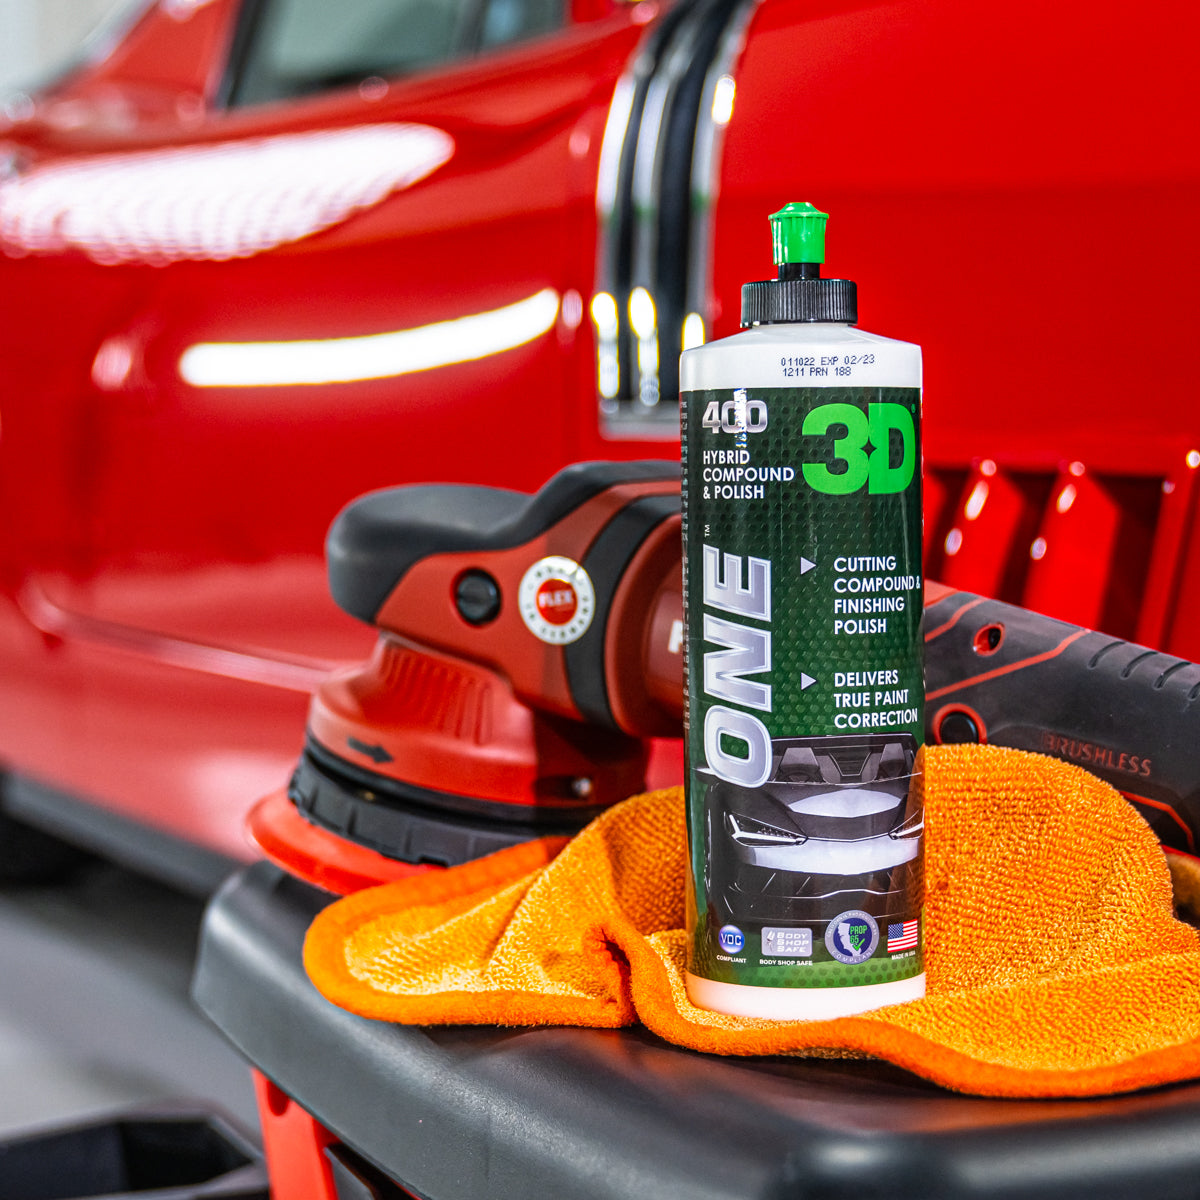 3D One is the best known 3D compound out there. Raving feedback from professionals and enthusiast makes this one step compound a great solution for removing lighter scratches and give the car a nice gloss. 3D Ireland